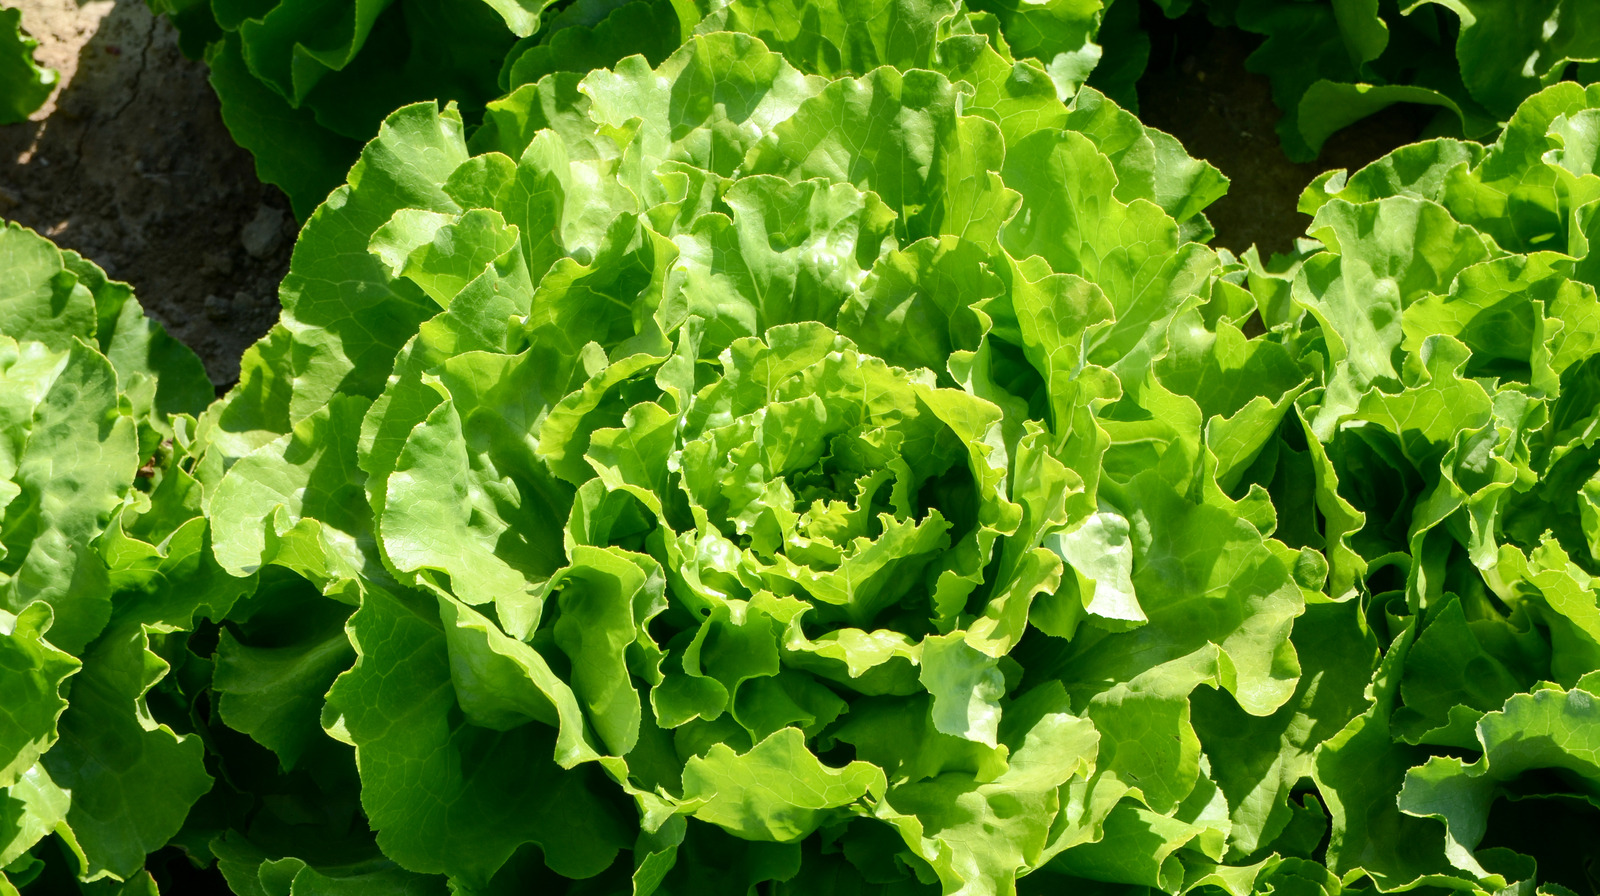 https://www.mashed.com/img/gallery/youve-been-storing-lettuce-wrong-this-whole-time/l-intro-1622305414.jpg